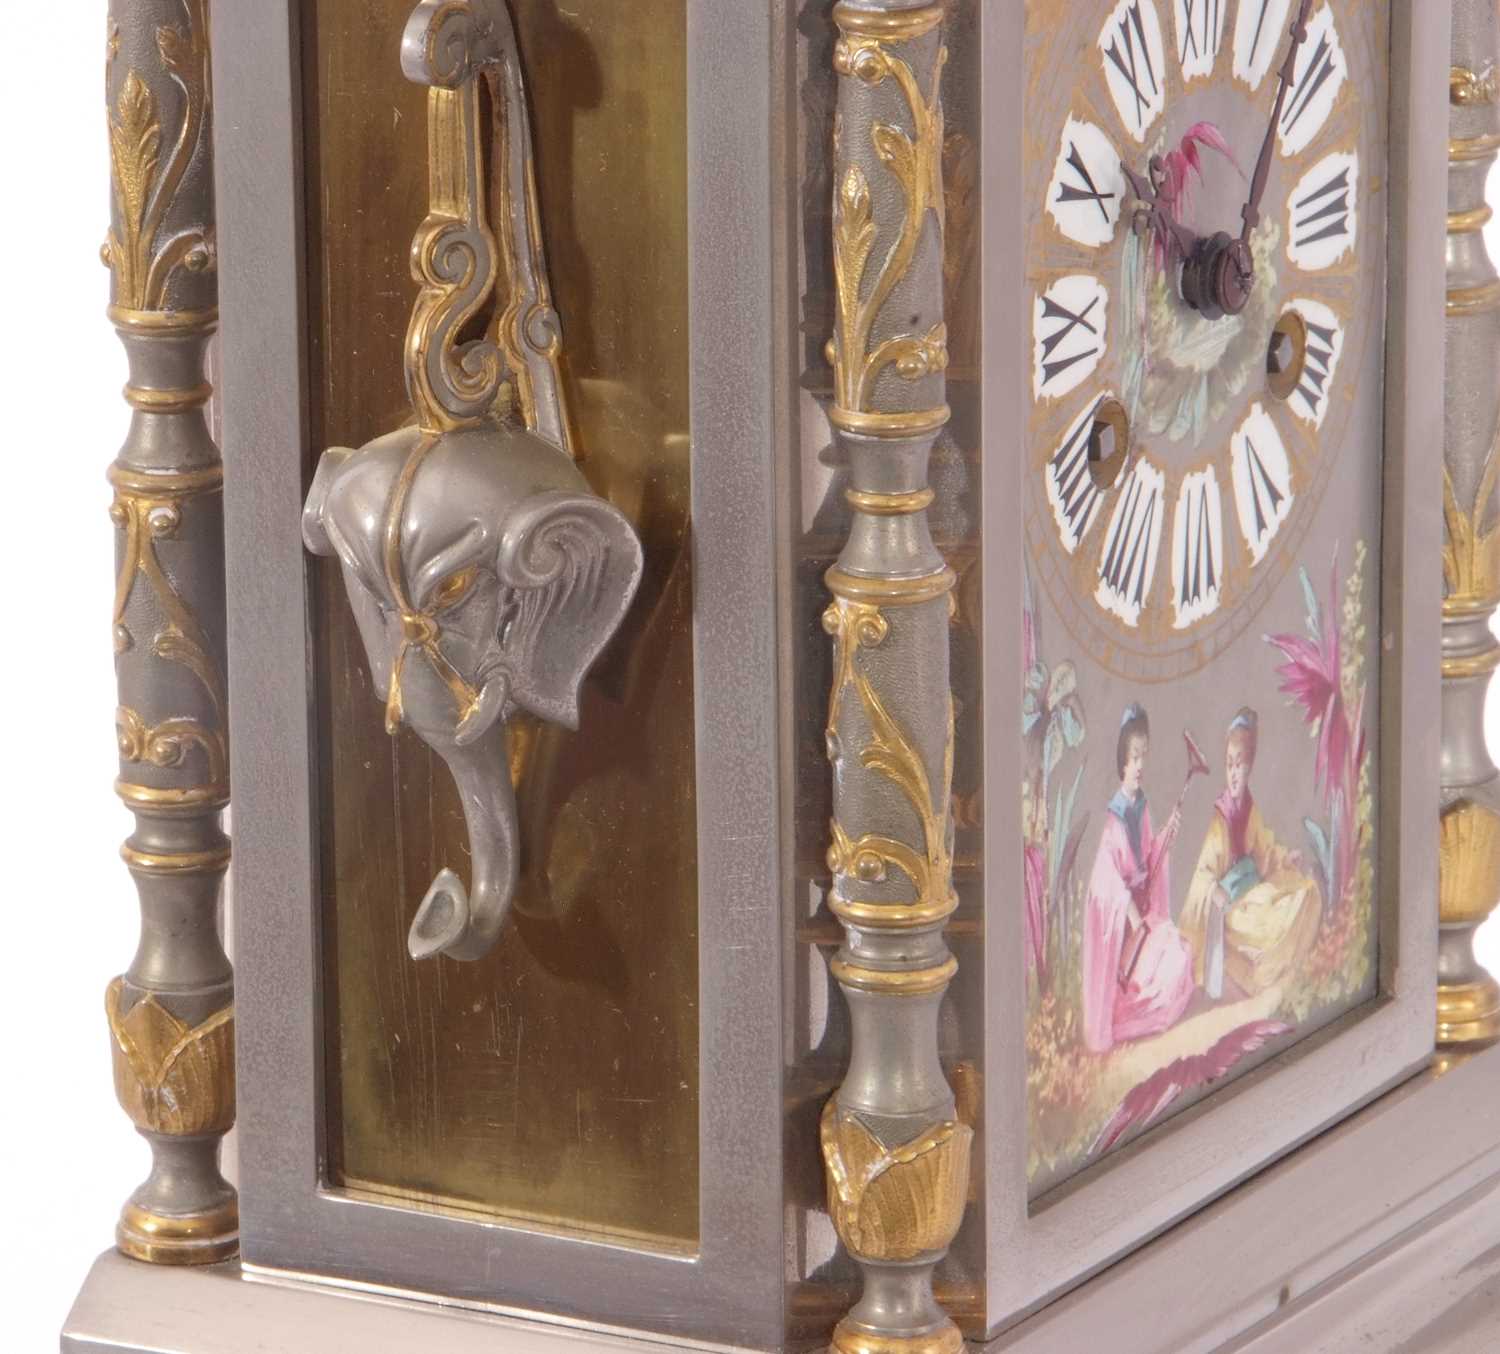 Good quality late 19th/early 20th century mantel clock, set in architectural metal and gilt - Image 10 of 11